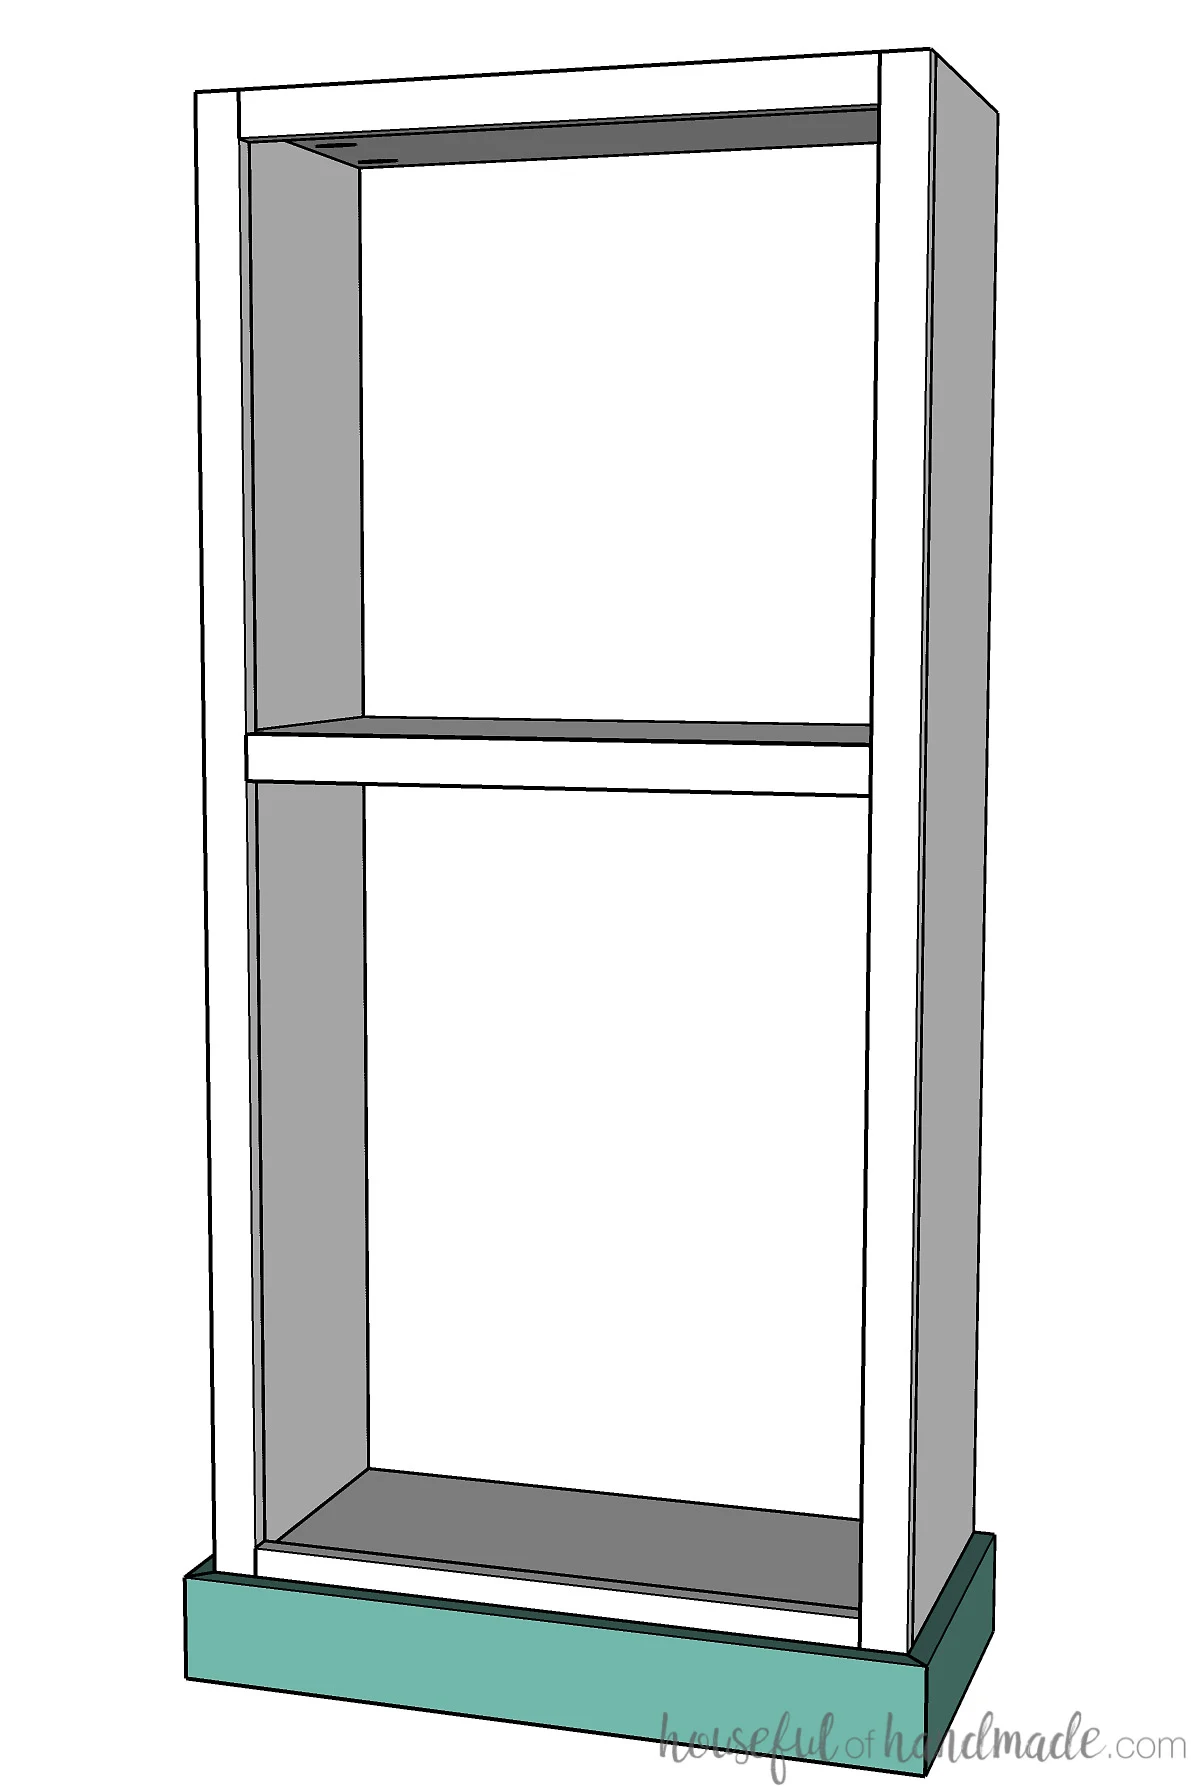 Sketch of tall bookcase with trim around the bottom instead of a toe kick.